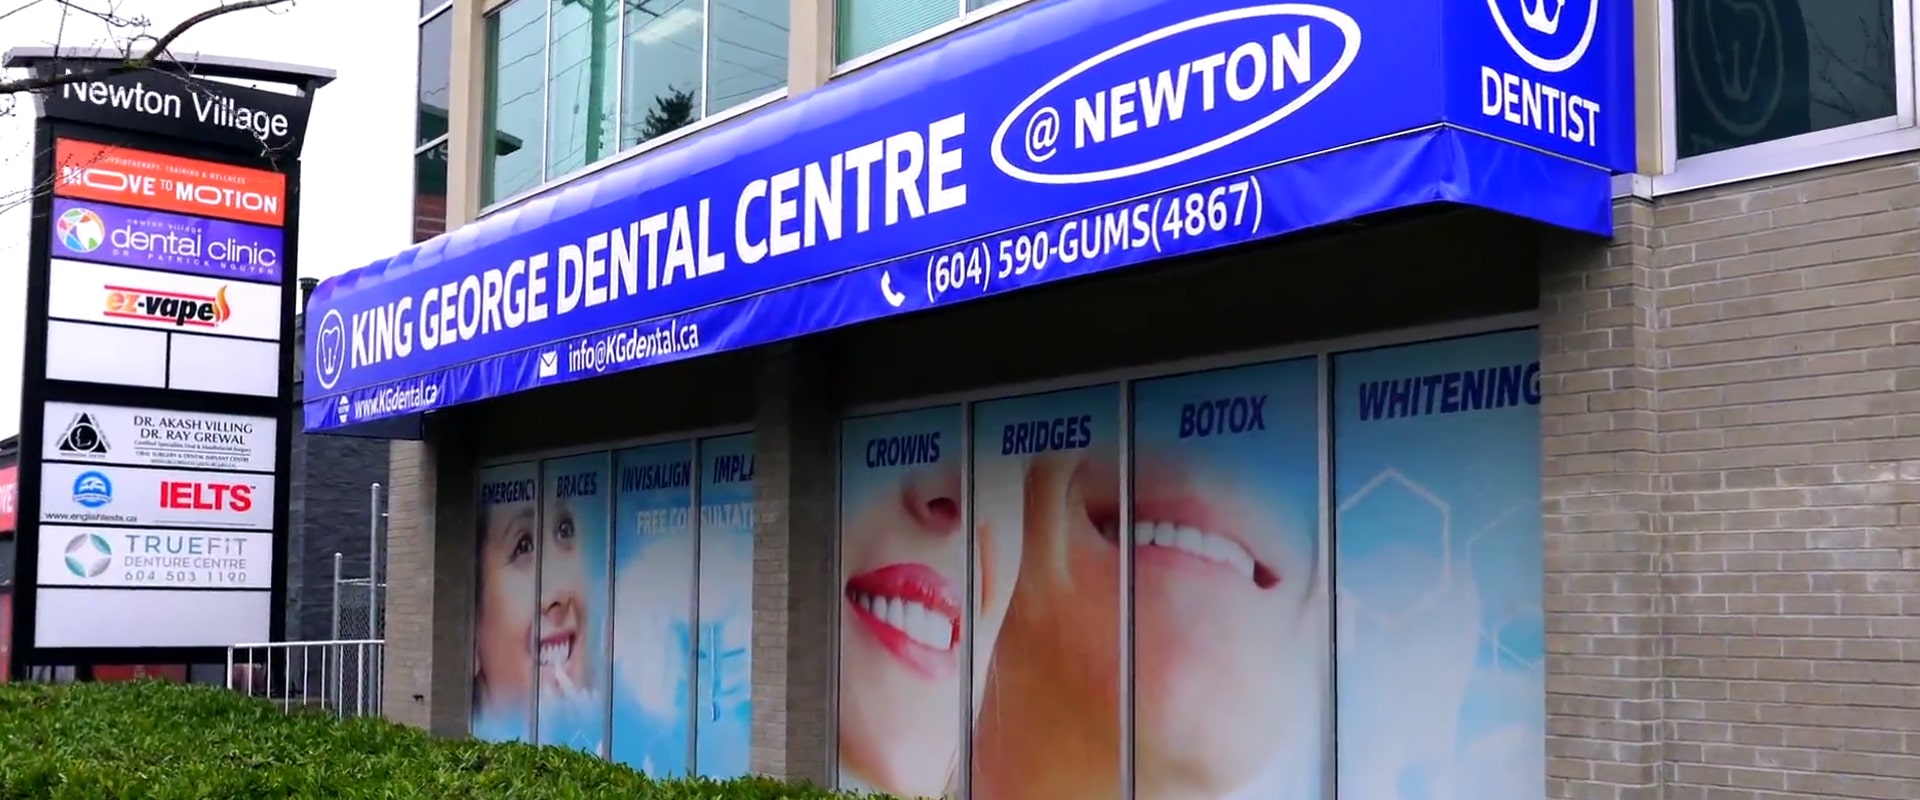 King George Dental Centre in Surrey, BC